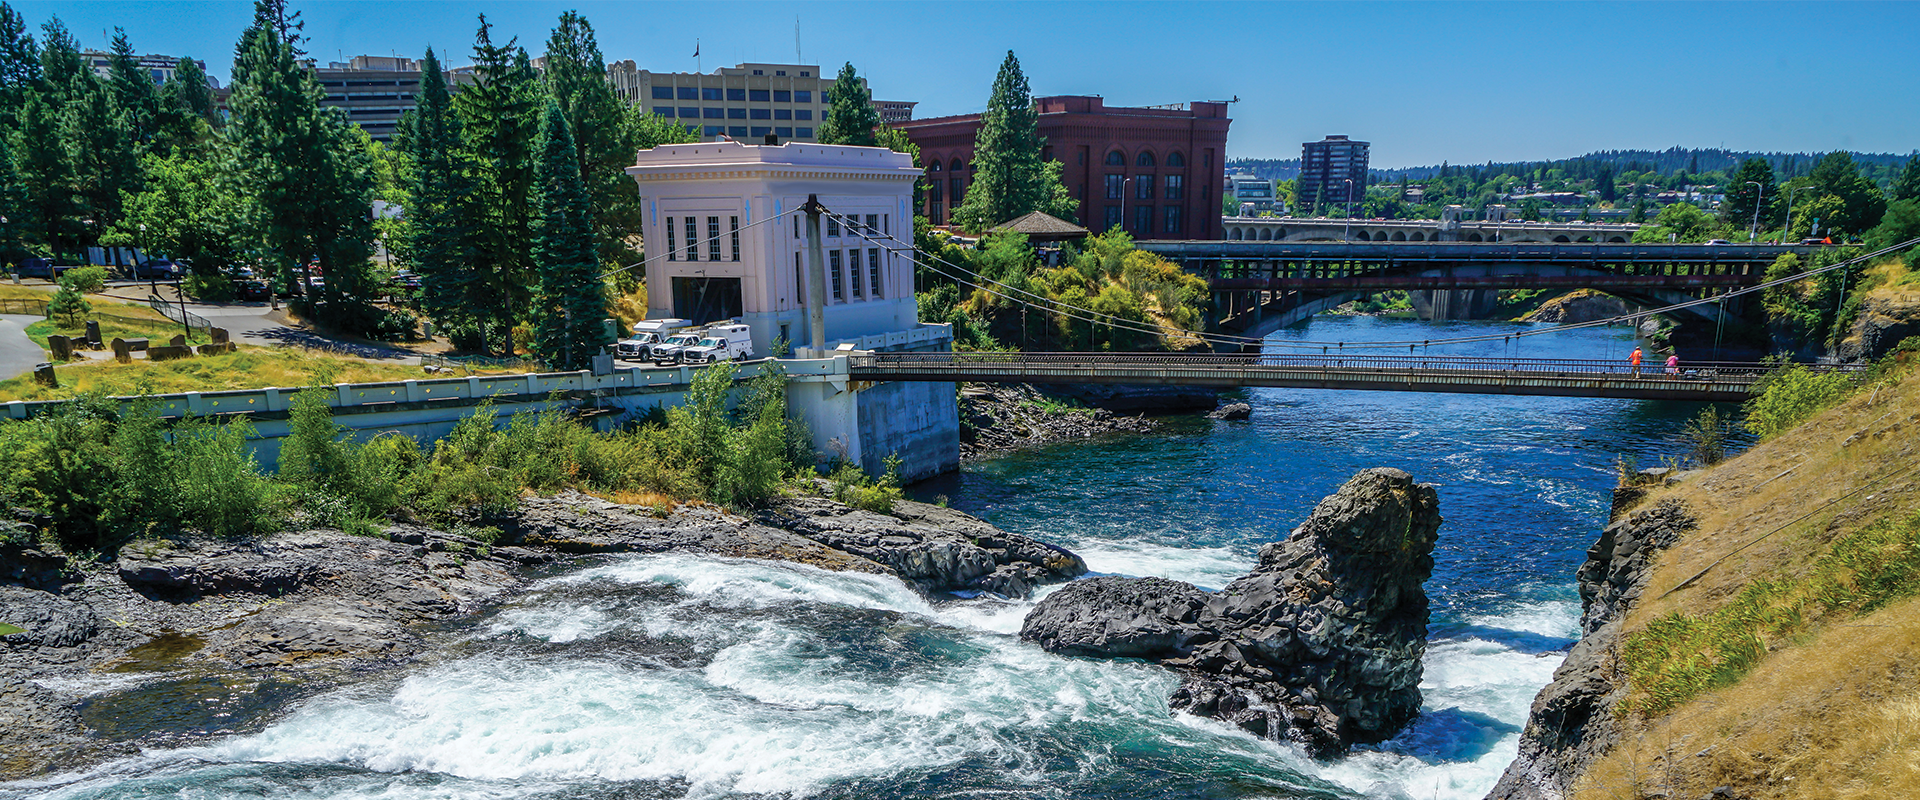 A river and bridges next to city buildings in Washington State